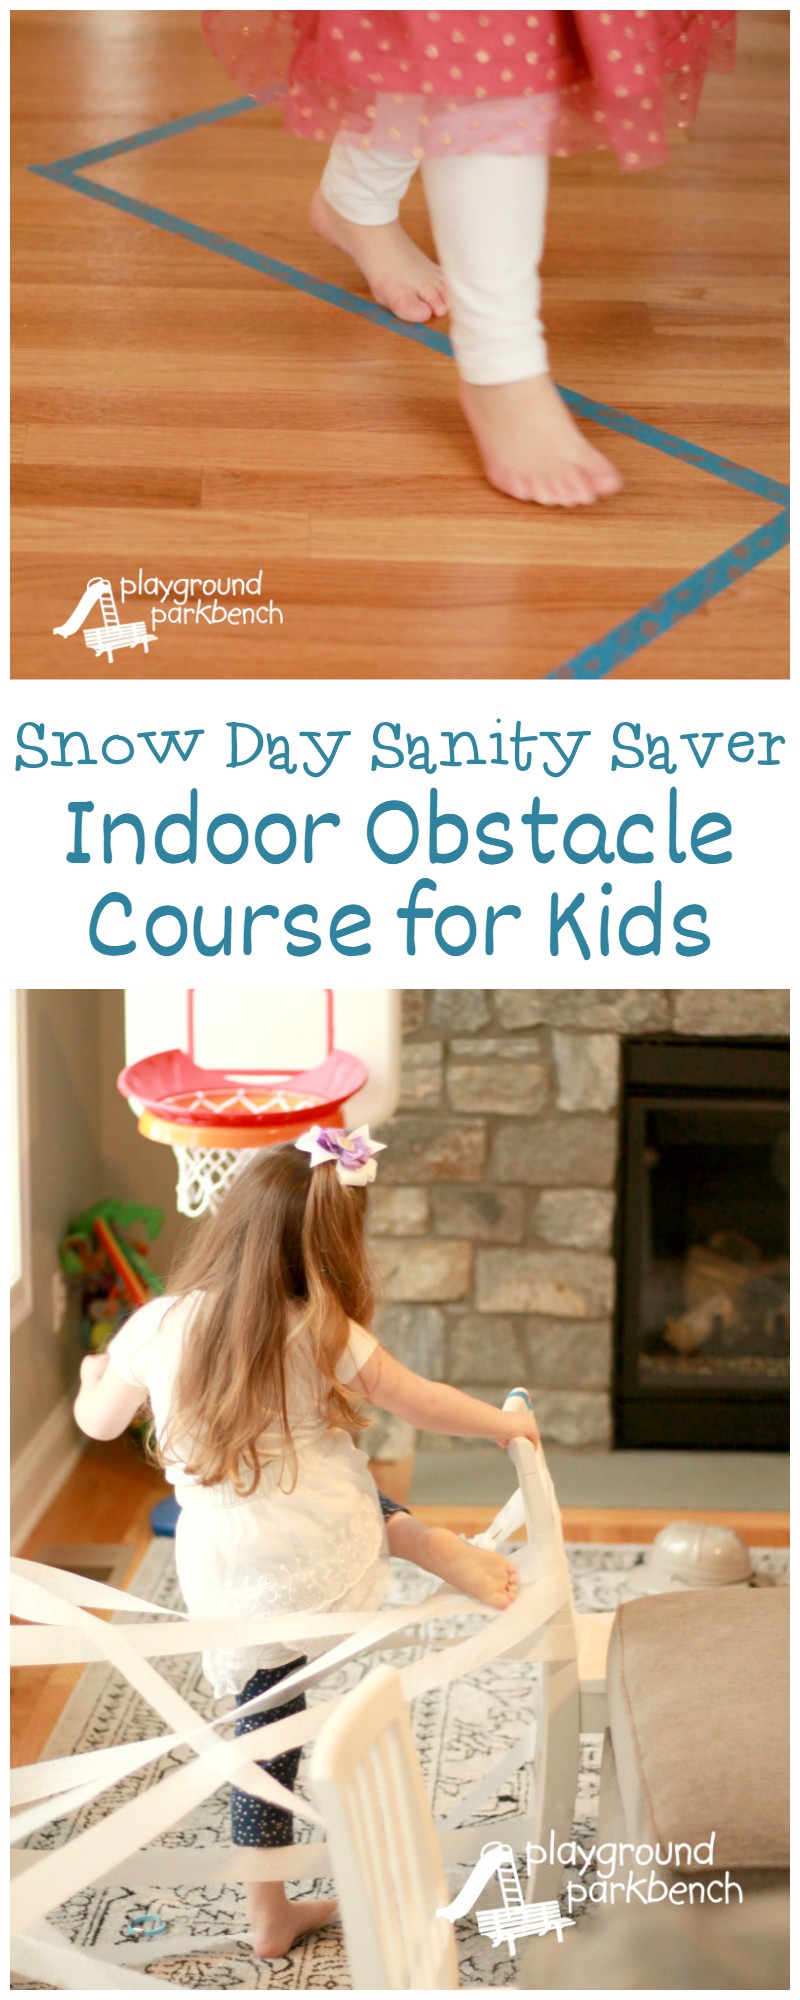 Indoor Obstacle Course for Bad Weather Days